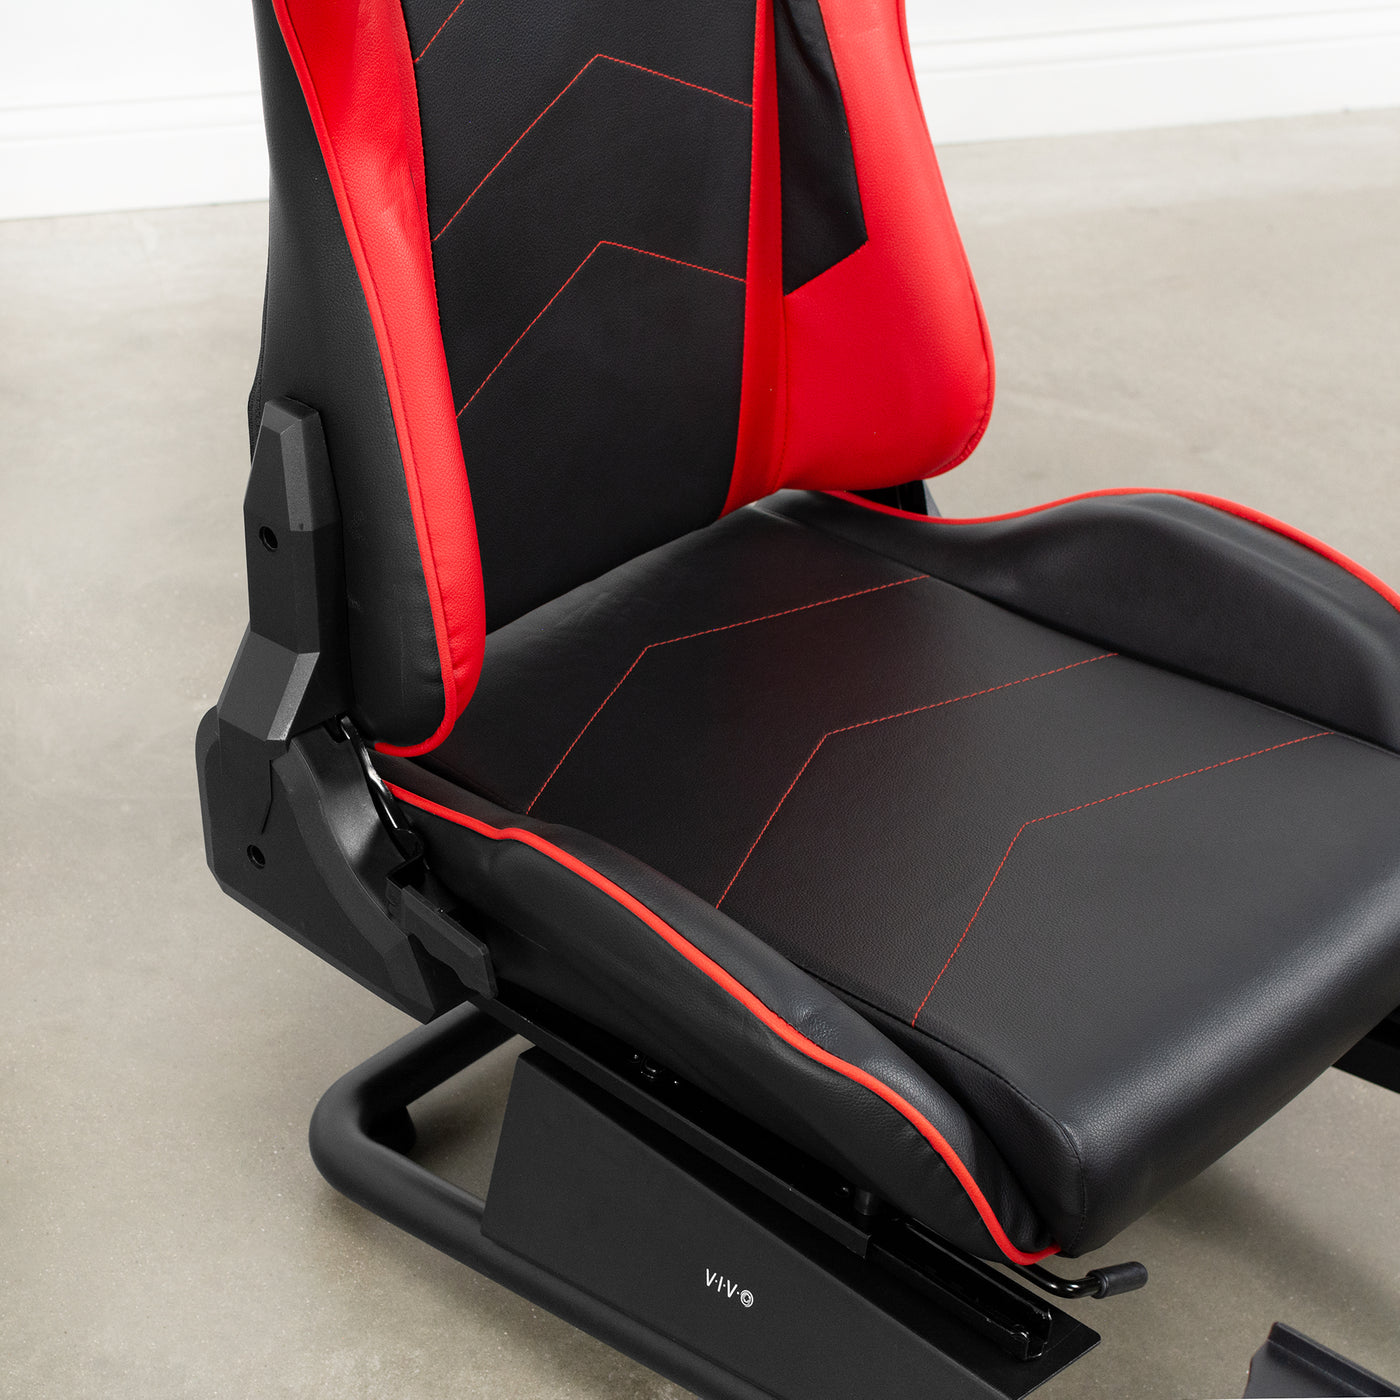 Red and black leather racing seat for gaming system set up. 